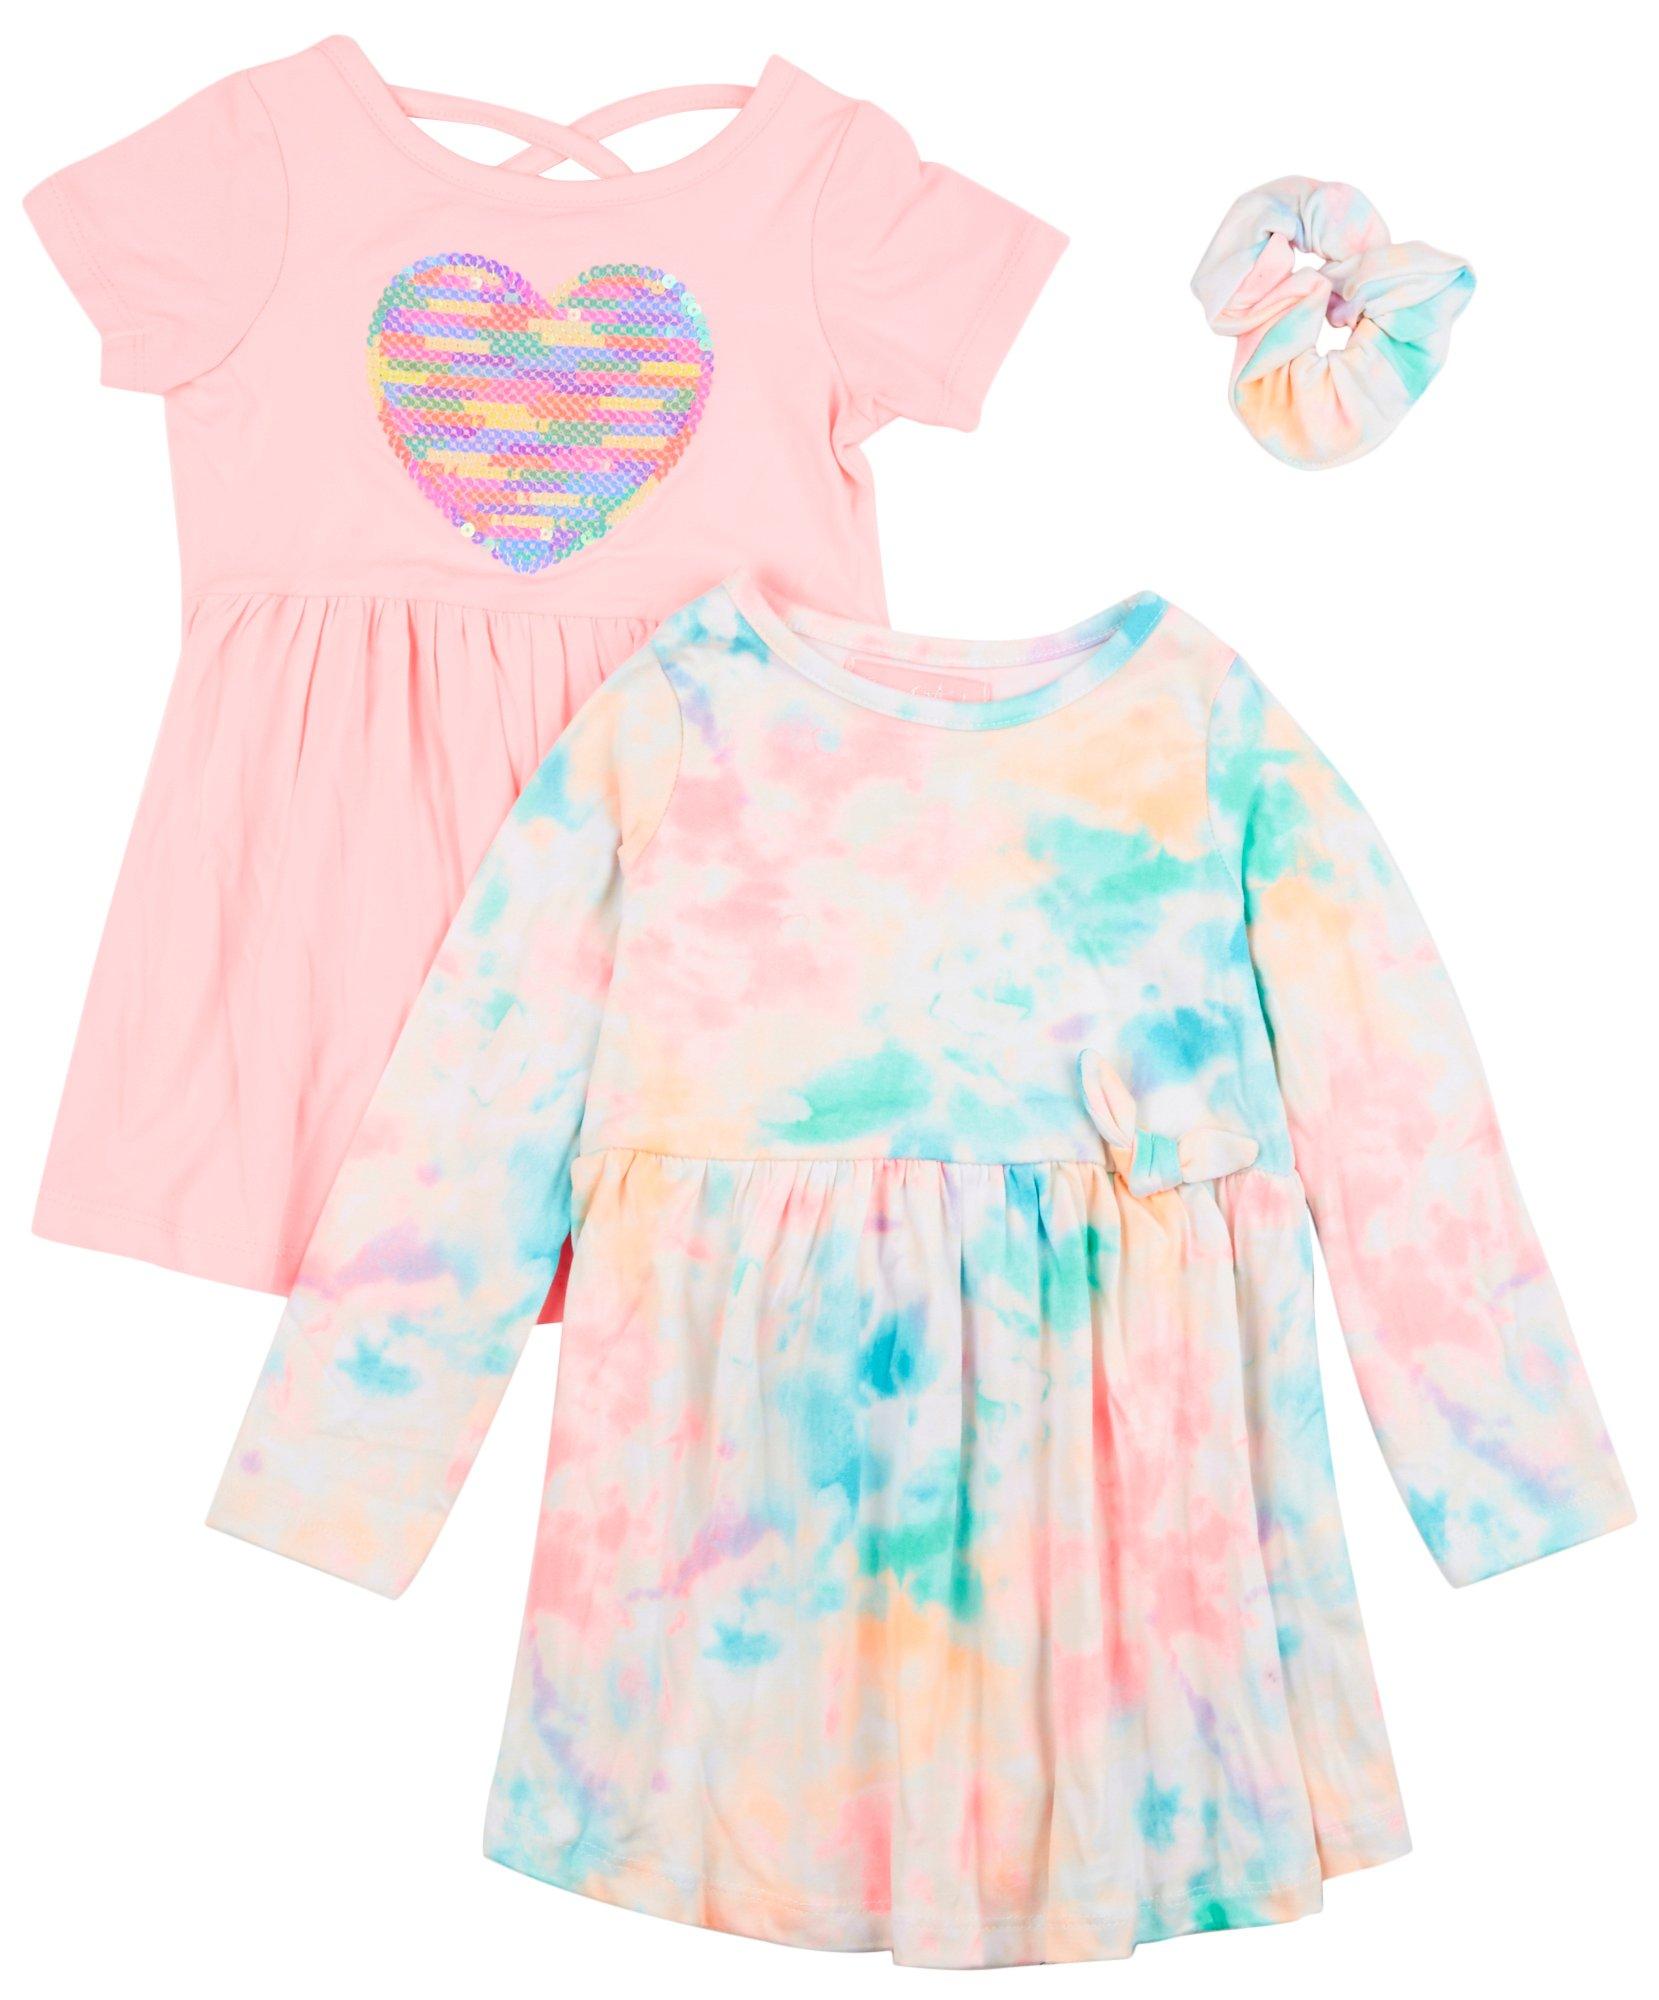 Freestyle Toddler Girls 3 Pc. Sequin & Tie